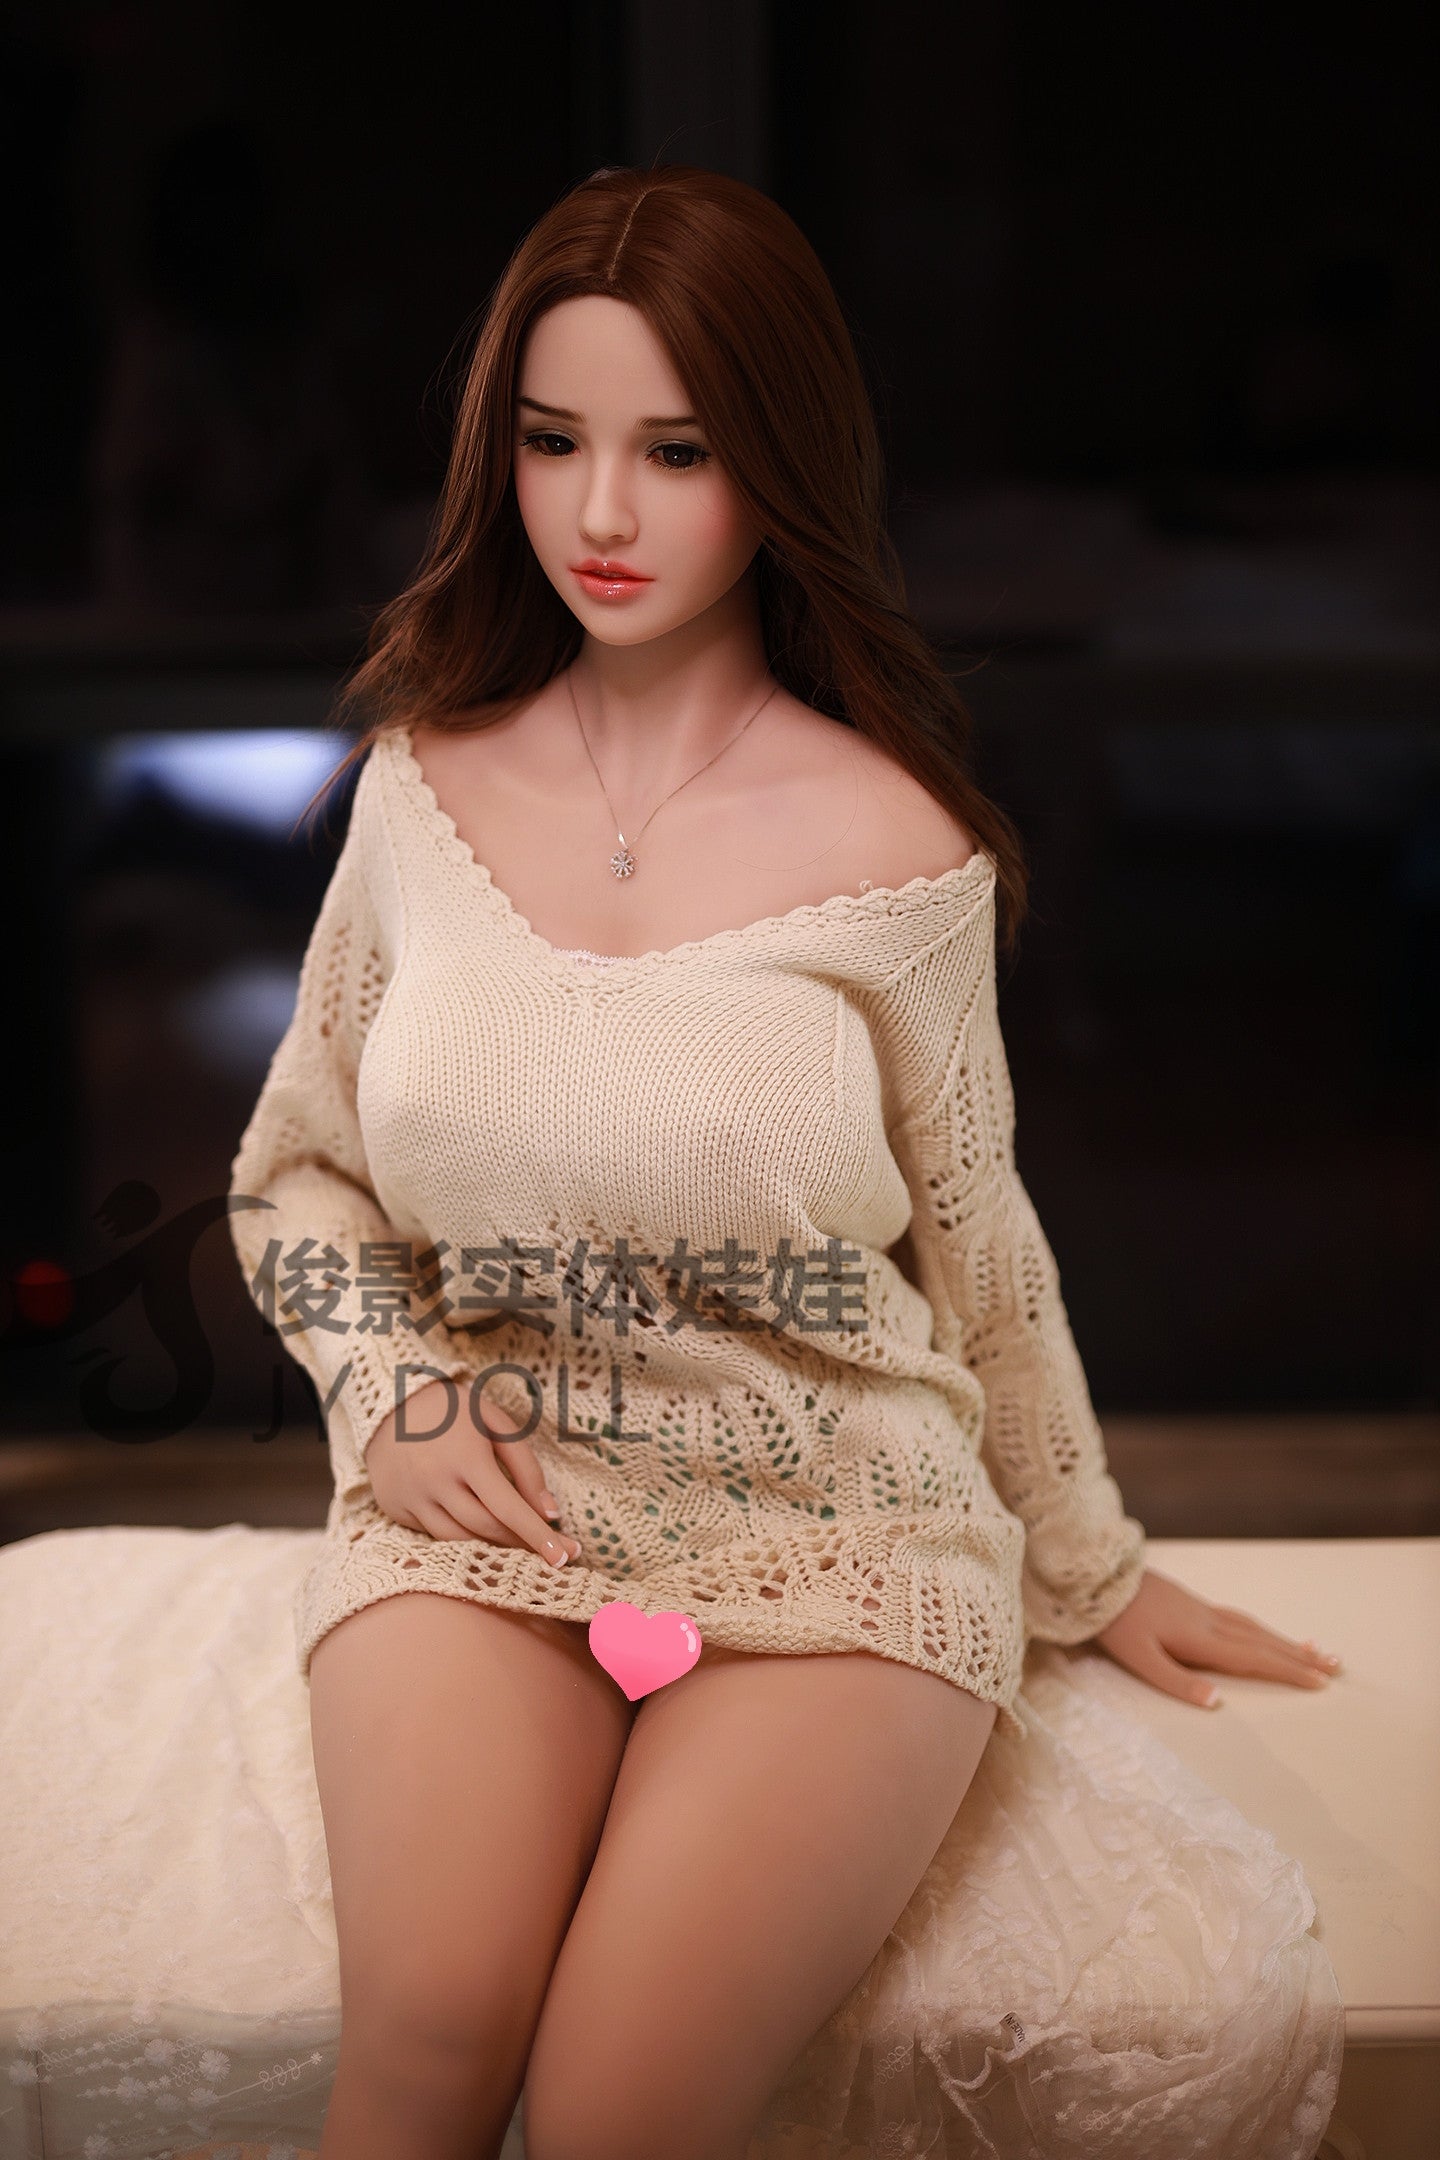 JY Doll 157 cm TPE - Amy | Buy Sex Dolls at DOLLS ACTUALLY